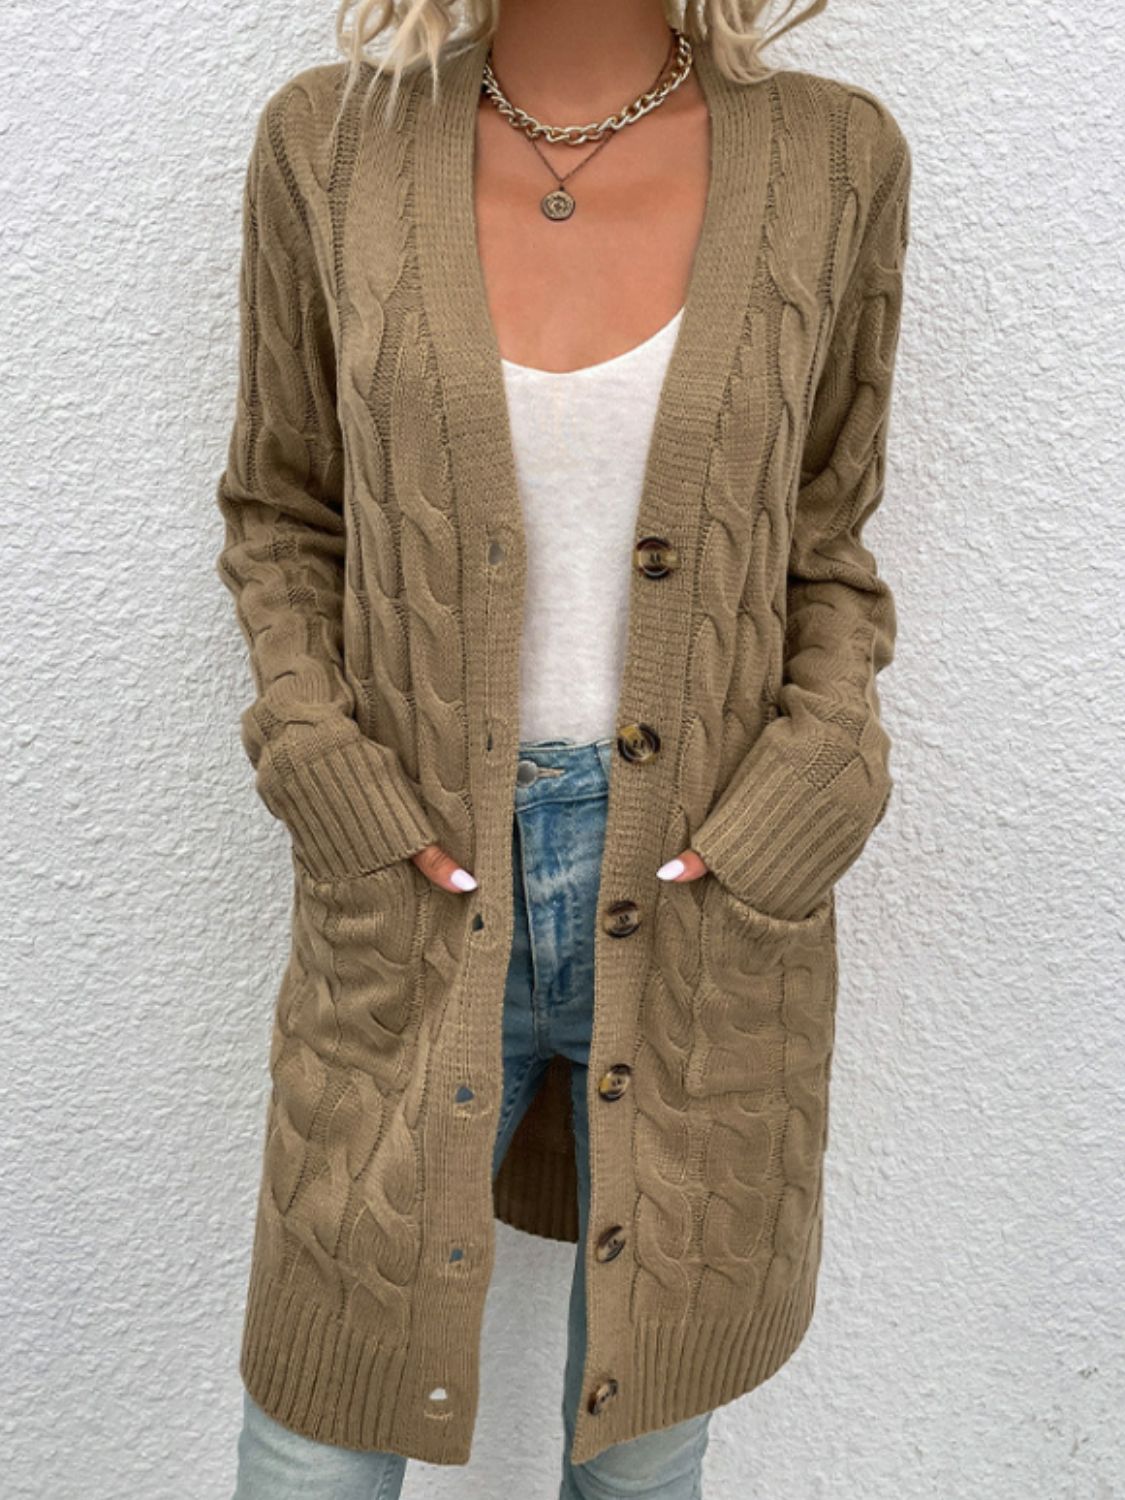 Cable-Knit Button Down Cardigan with Pockets - Light Brown / S - Women’s Clothing & Accessories - Shirts & Tops - 16